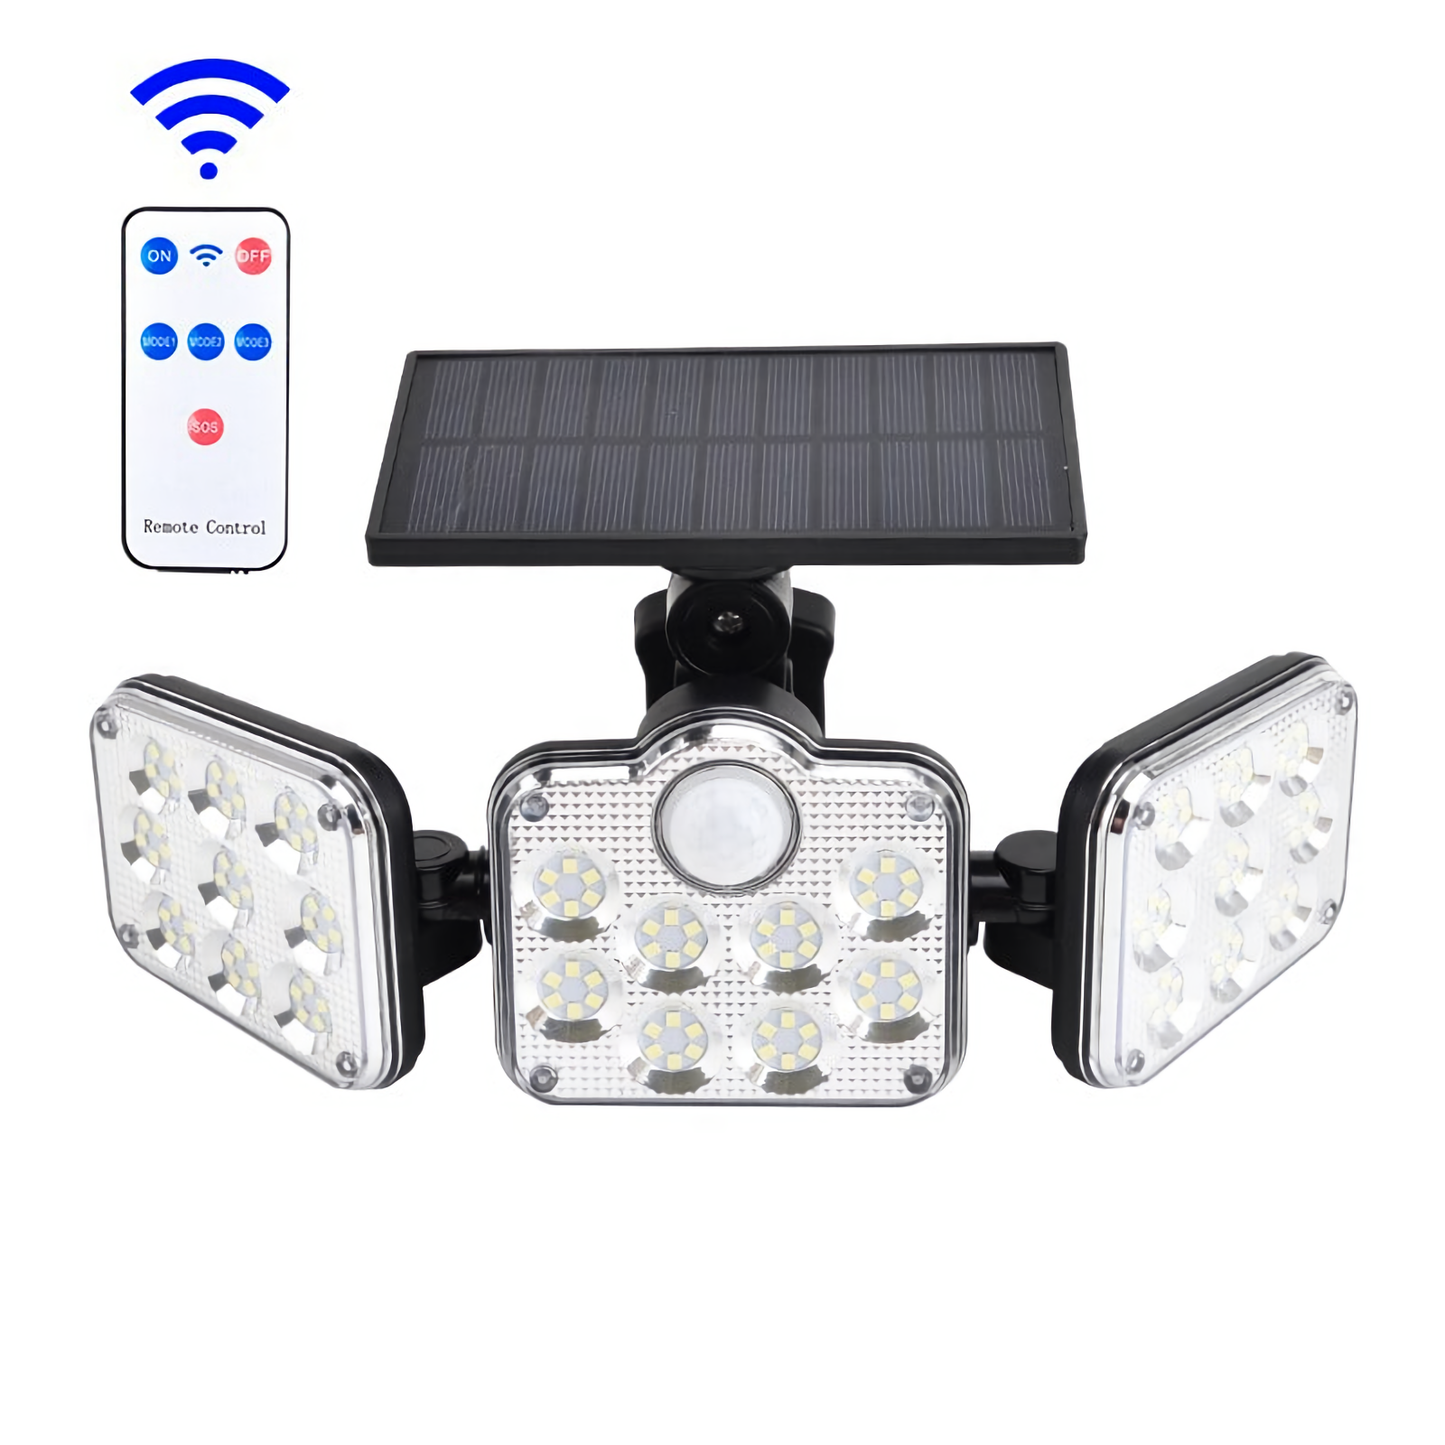 Outdoor Solar Light with Motion Sensor, LED Security Lights, 138 led, 3 Adjustable Head Waterproof Wireless Wall Lights